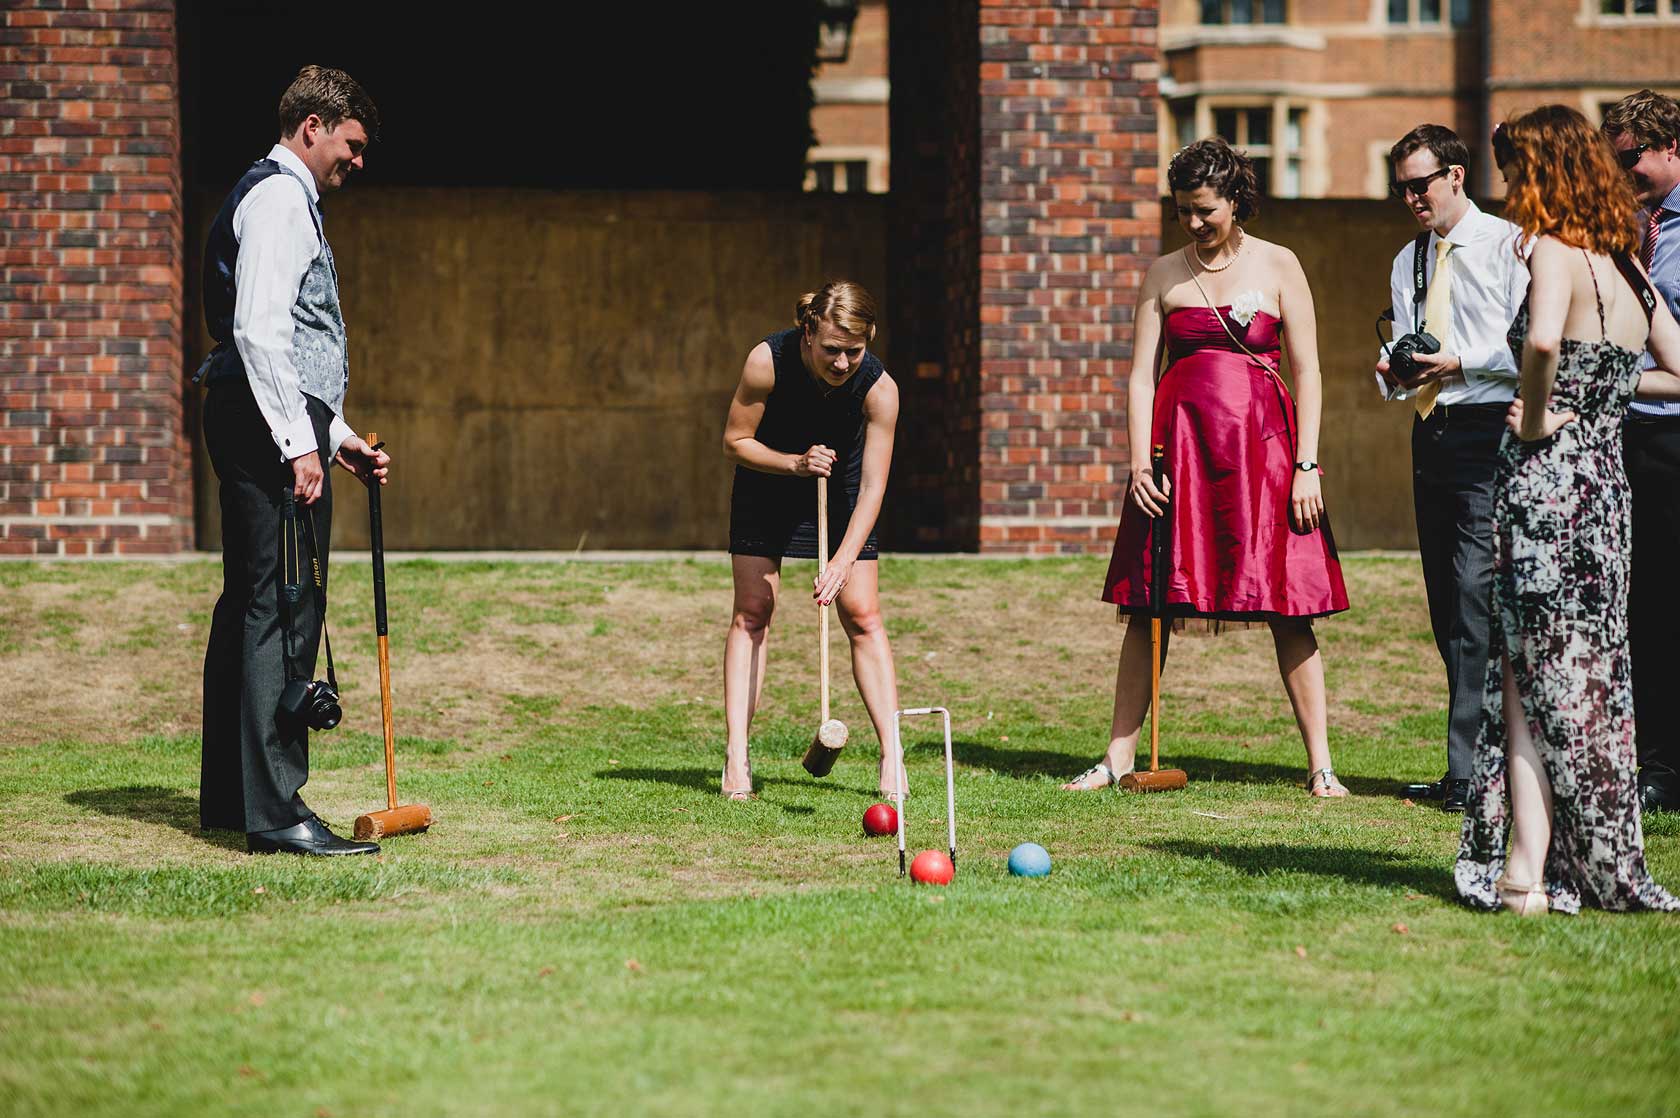 Reportage Wedding Photography at Queens College